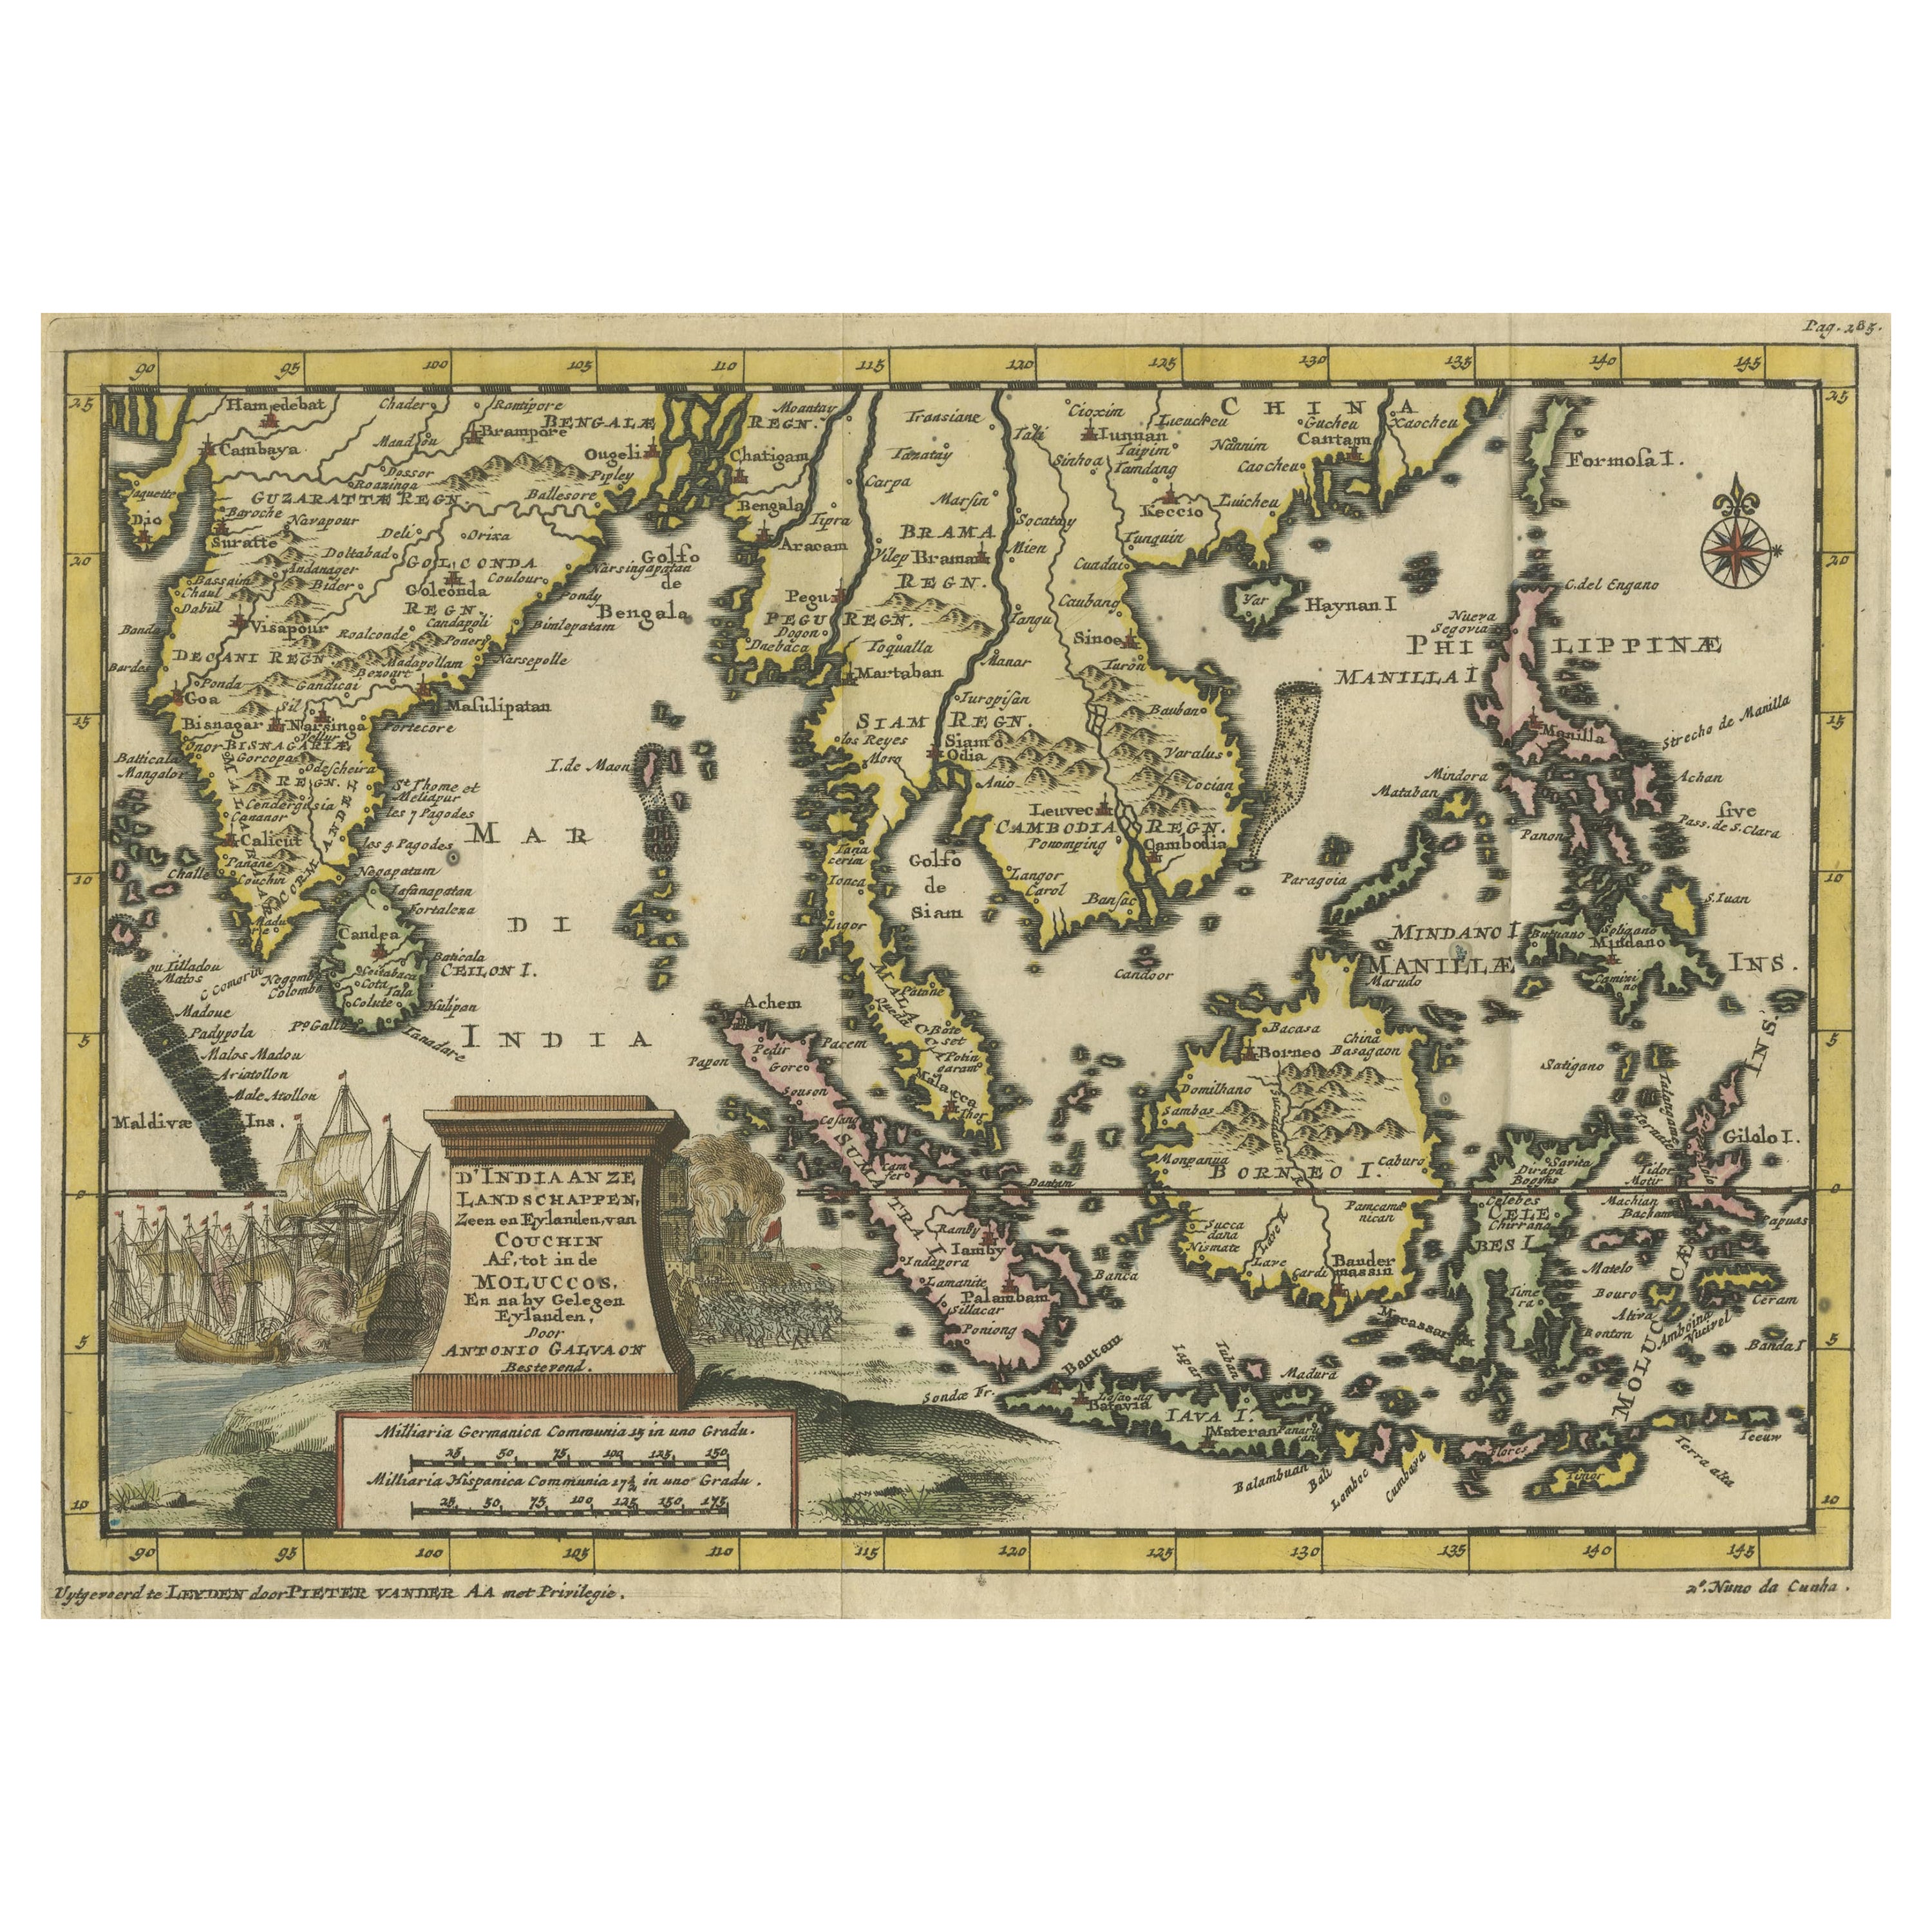 Striking Antique Map Centered on the Malay Peninsula